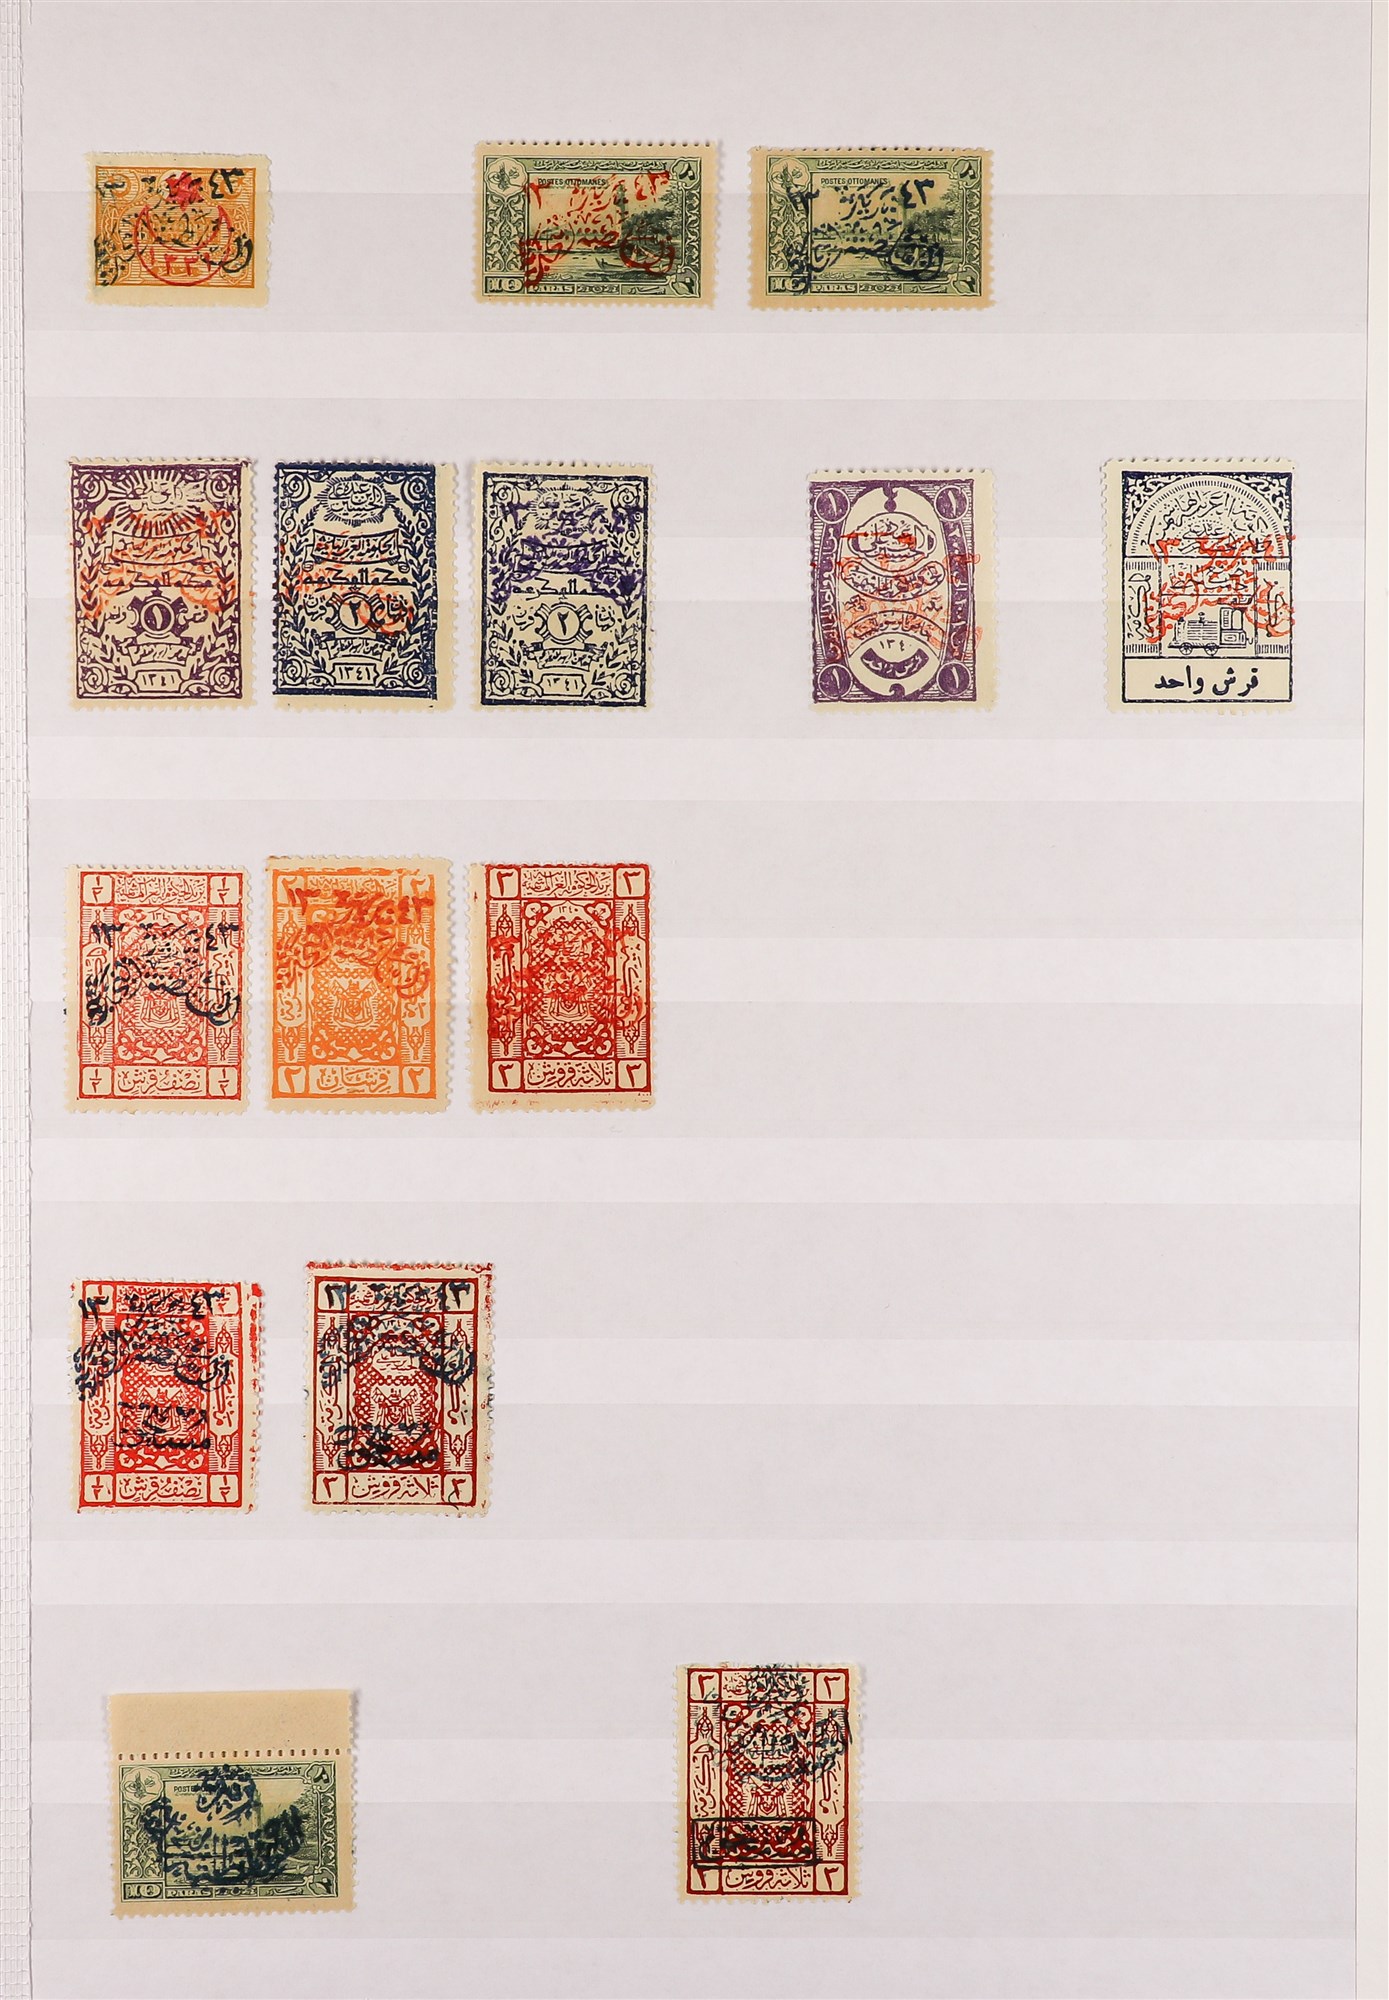 SAUDI ARABIA NEJDI OCCUPATION 1925 mint / much never hinged collection of 15 stamps, note 1925 (Mar)